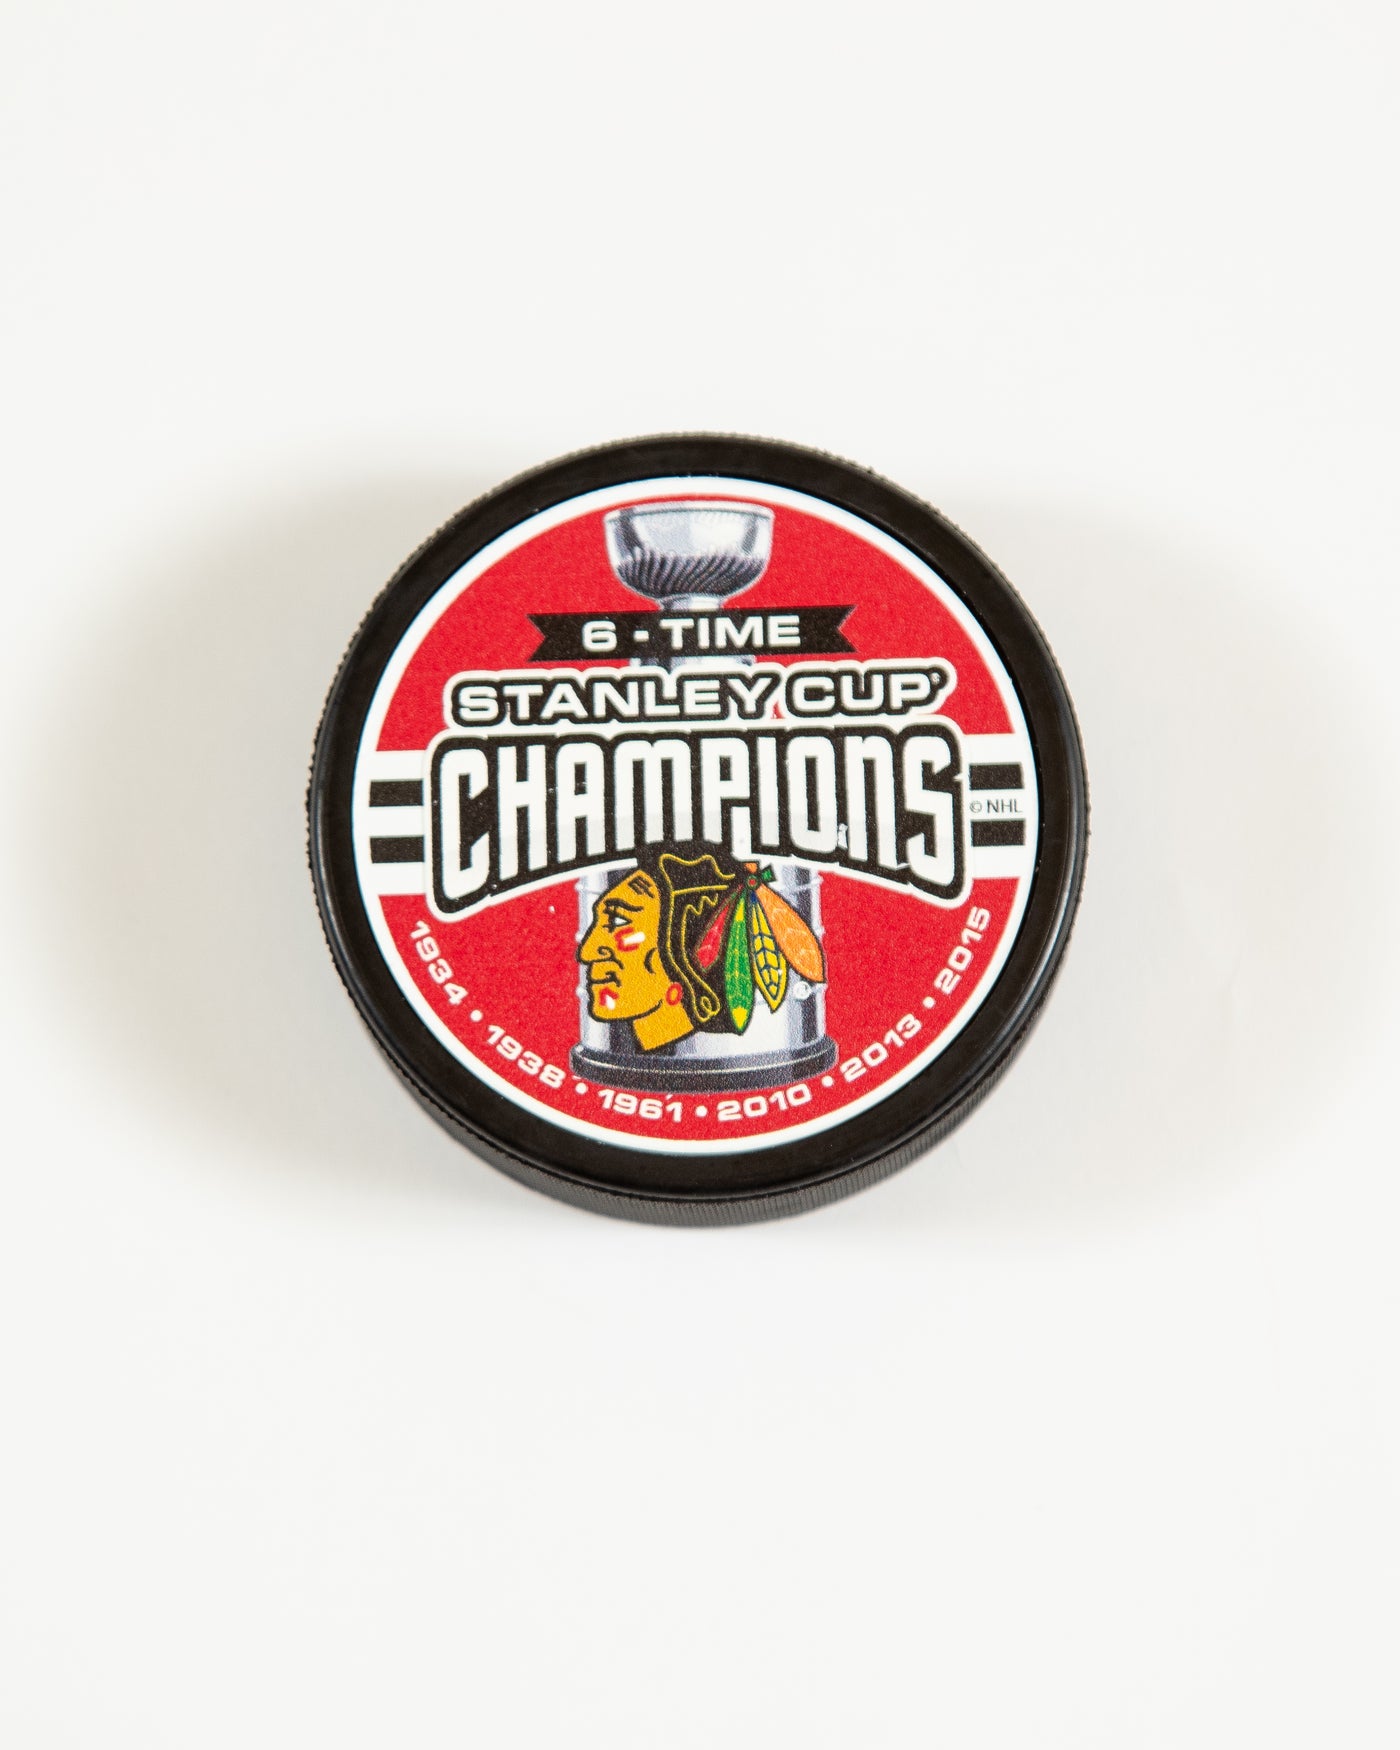 Chicago Blackhawks 6-tme Stanley Cup Champions designed puck - front angle